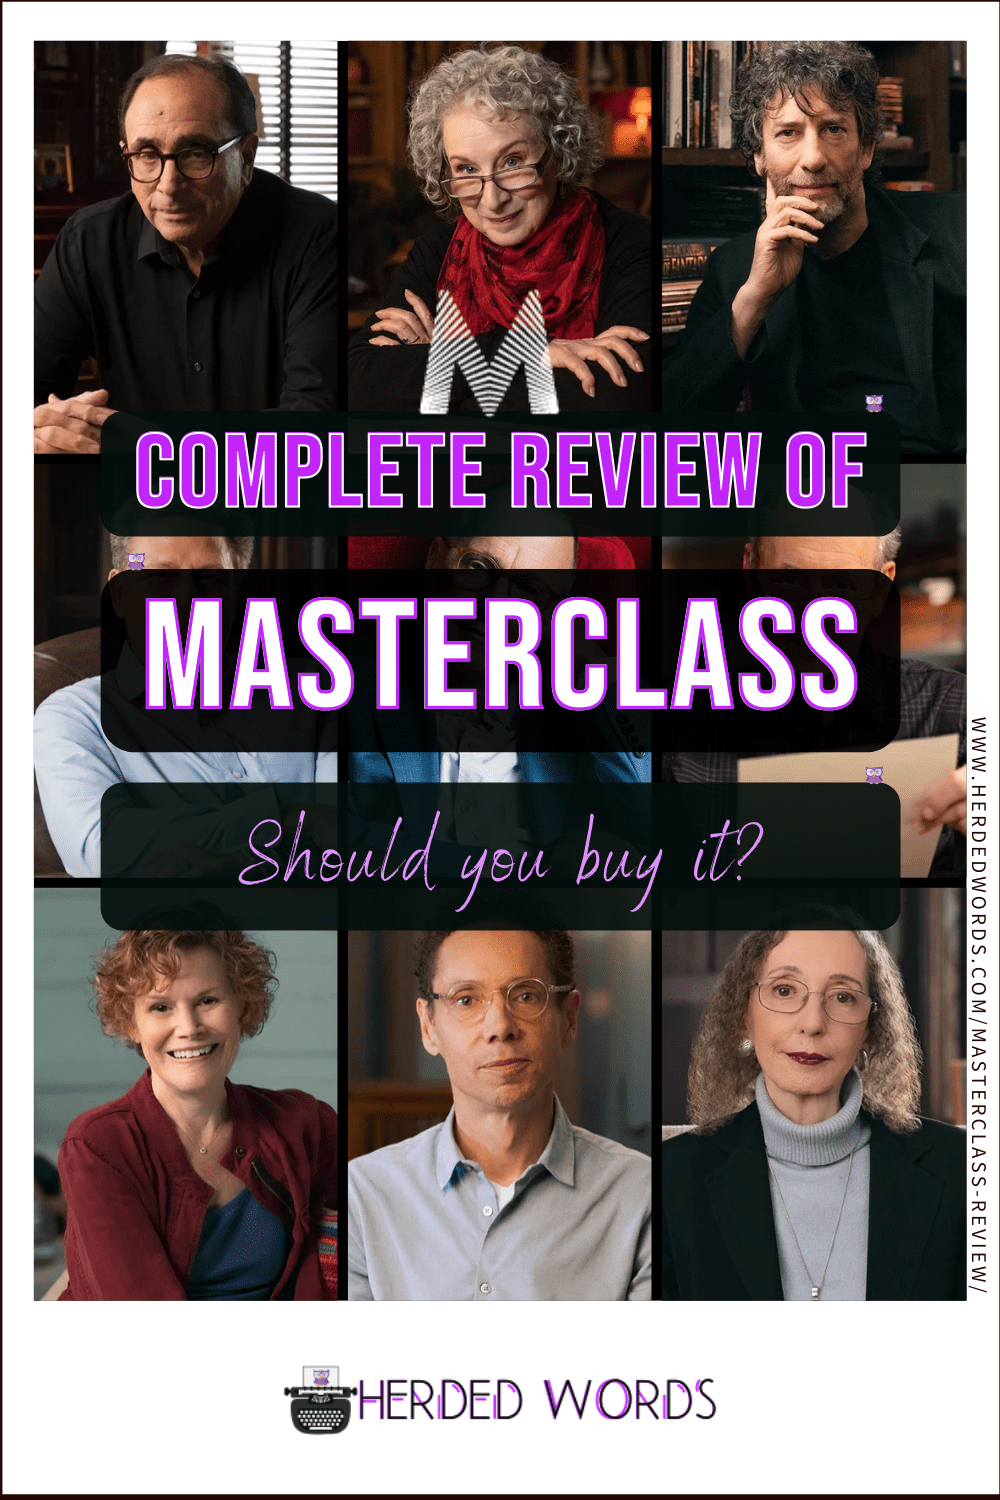 Image Link to Complete Review of Masterclass (should you buy it?)